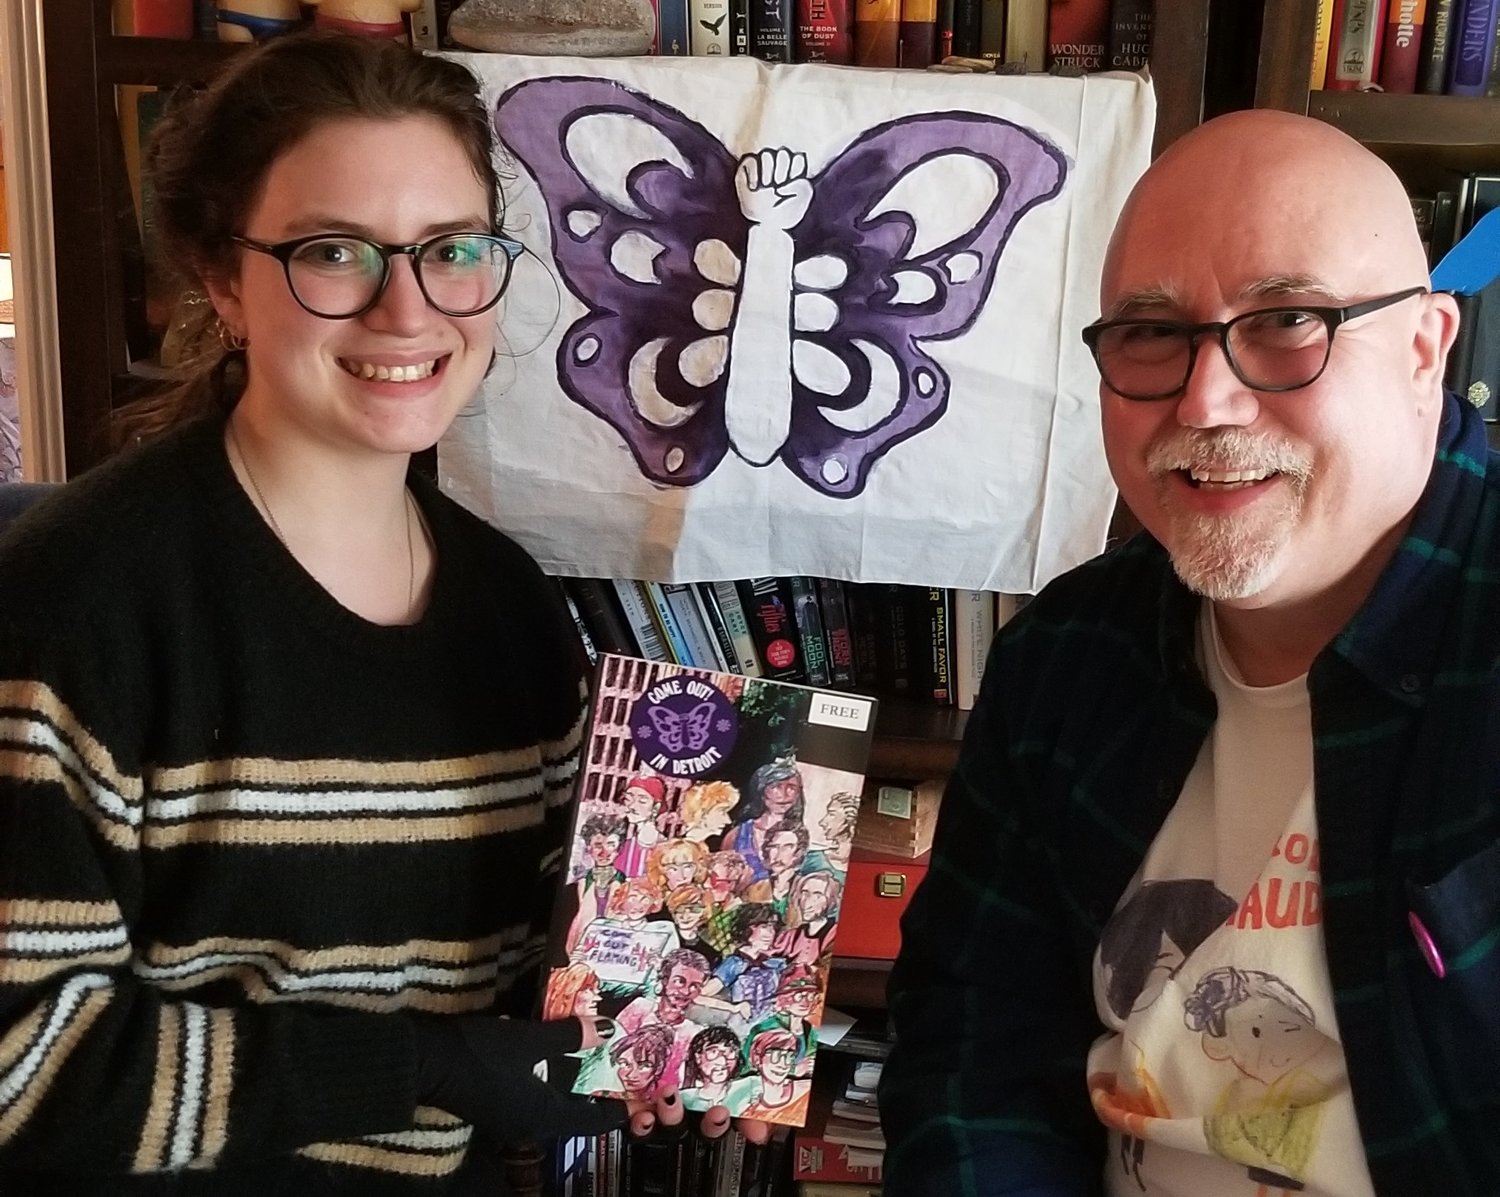 Isabel Clare Paul and Tim Retzloff with “Come Out! In Detroit,” a comic book they co-authored that commemorates the first gay pride march in Michigan 50 years ago.